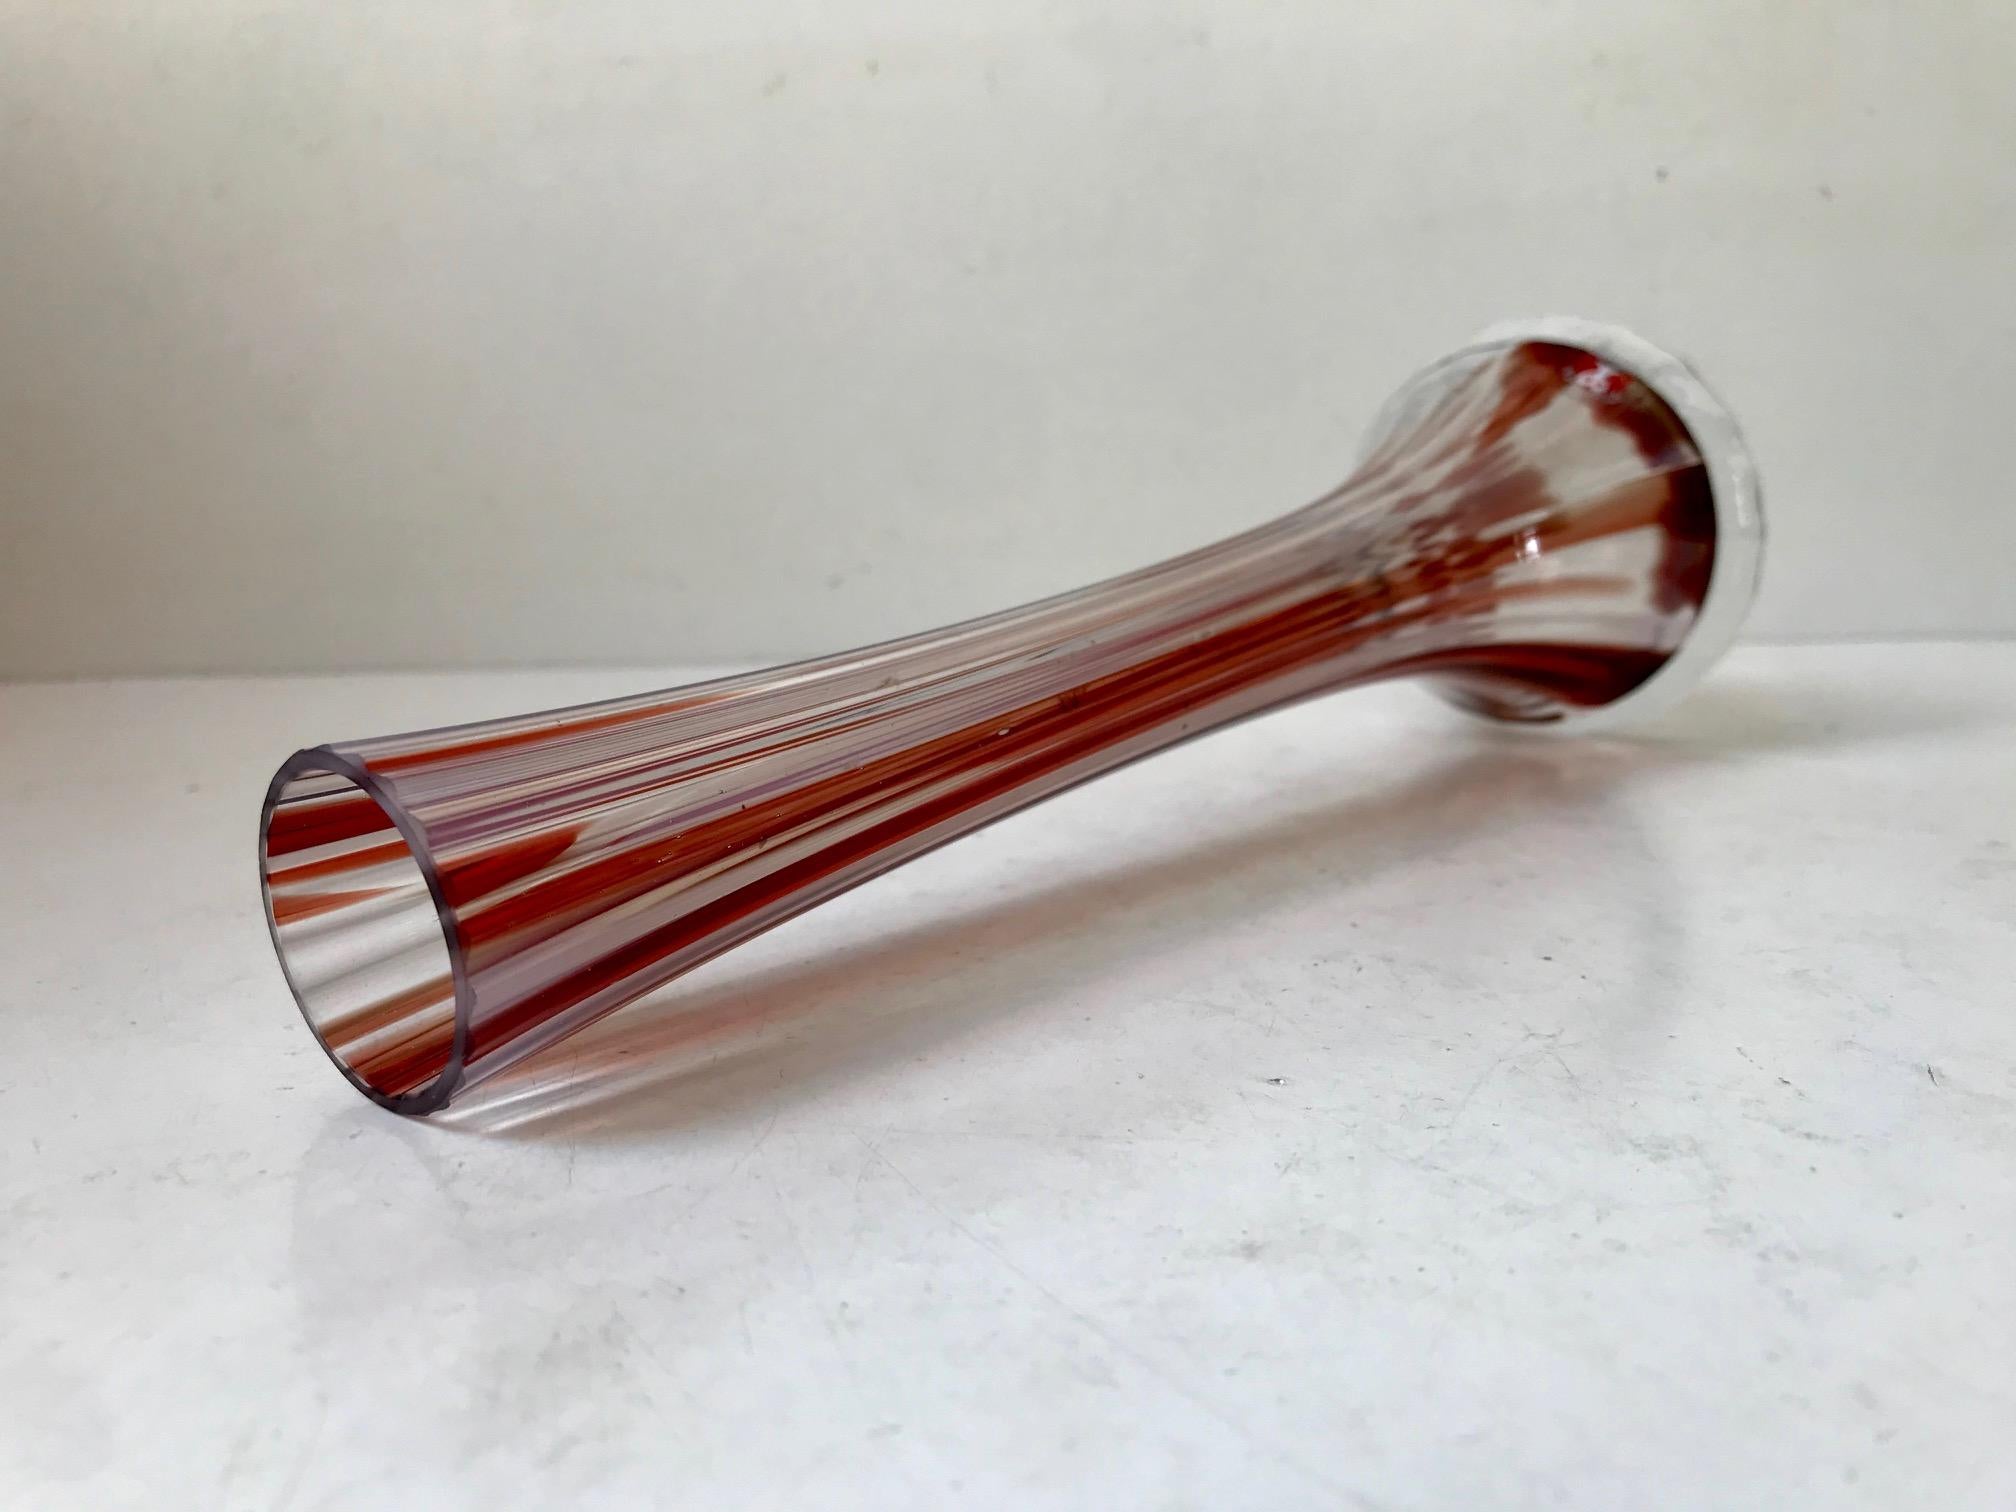 A hand sculpted clear glass vase with red stripes and vertical ribbings. Designed and made at Studiolasi in Finland, circa 1970. Measurements: H 25.3, D 8/3 cm.